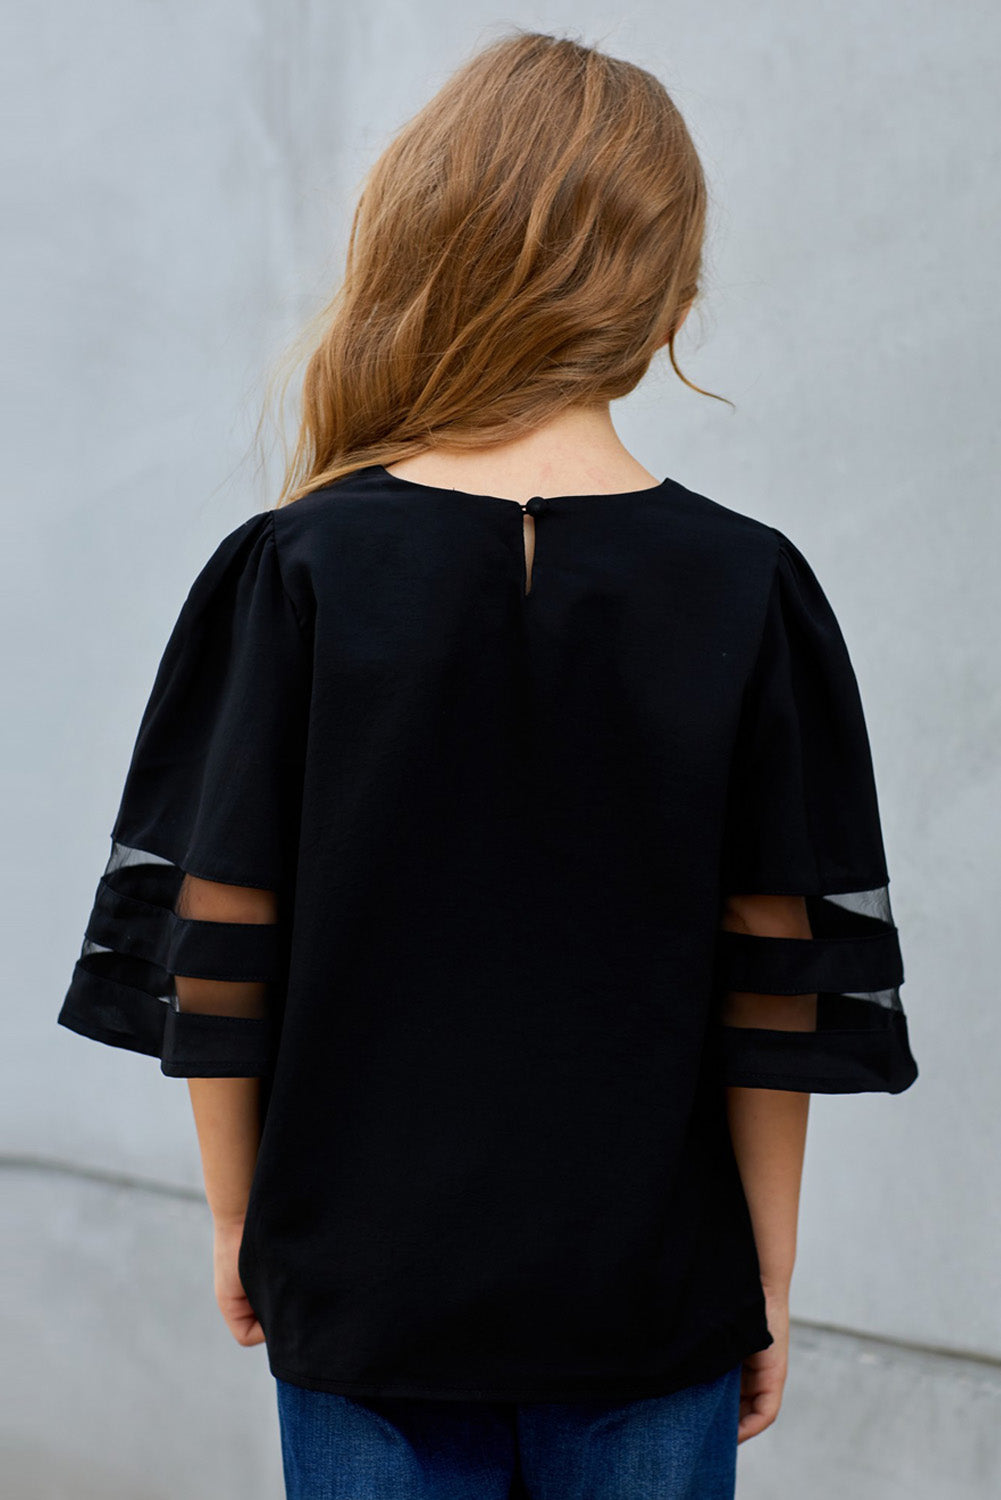 Girls Sheer Striped Flare Sleeve Tee Shirt, Availble in Black or White, Sizes 4T - 12